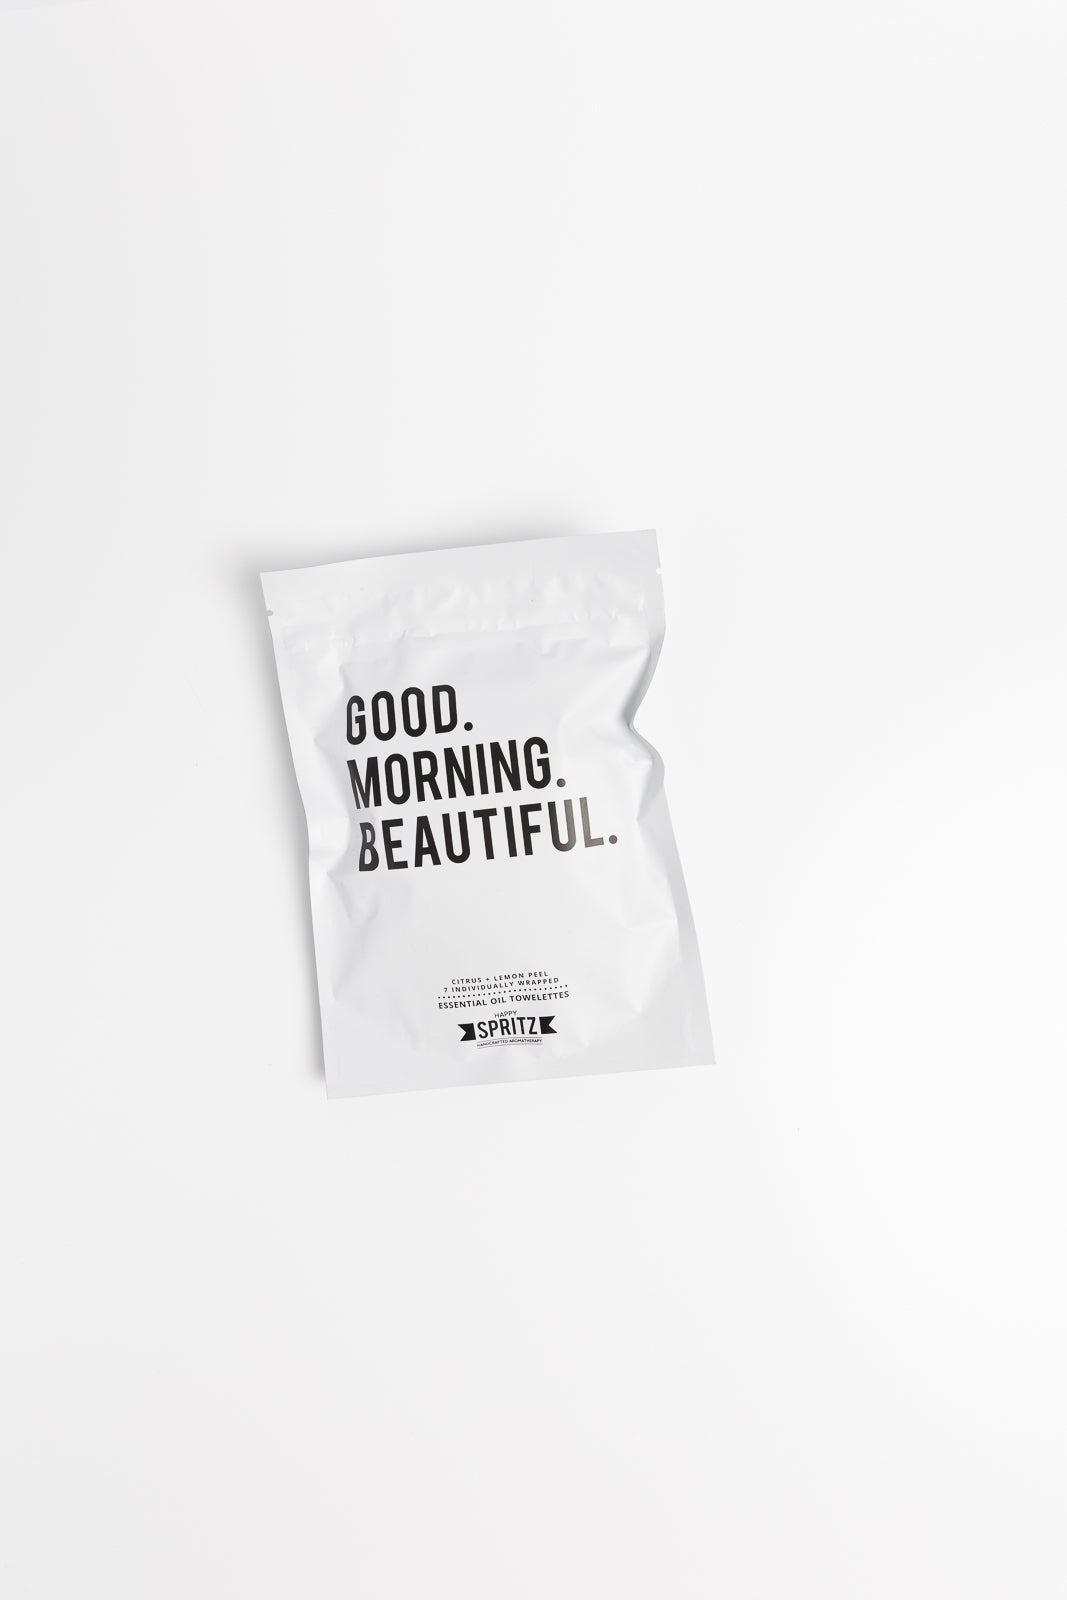 'Good Morning Beautiful' Essential Oil Towelettes